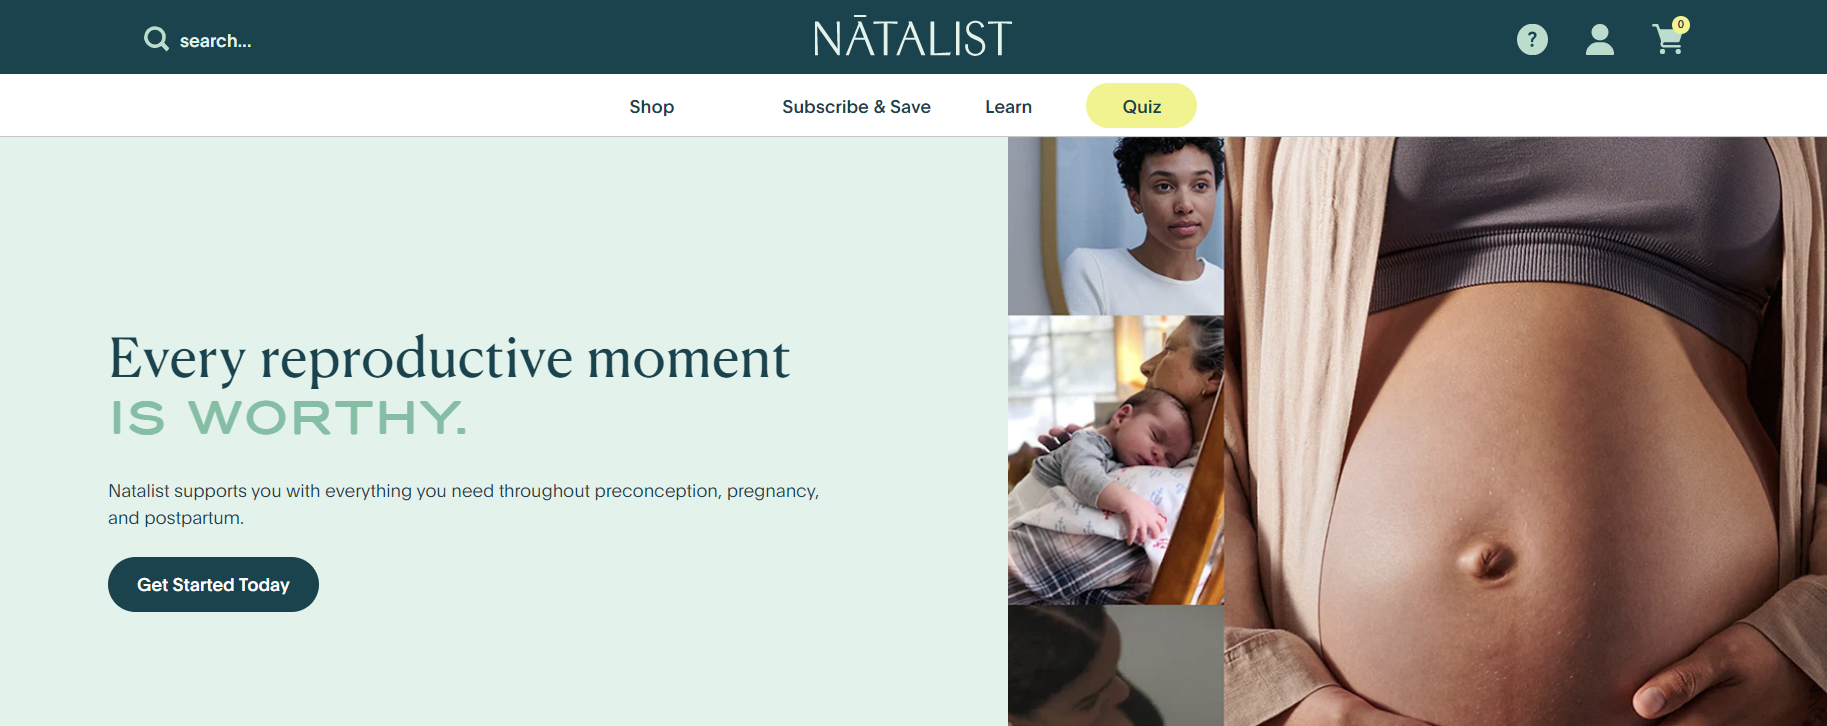 Natalist is a company founded in 2019 by a team of moms and doctors who are committed to reducing shame, misinformation, and outdated product offerings for women on their journey to parenthood